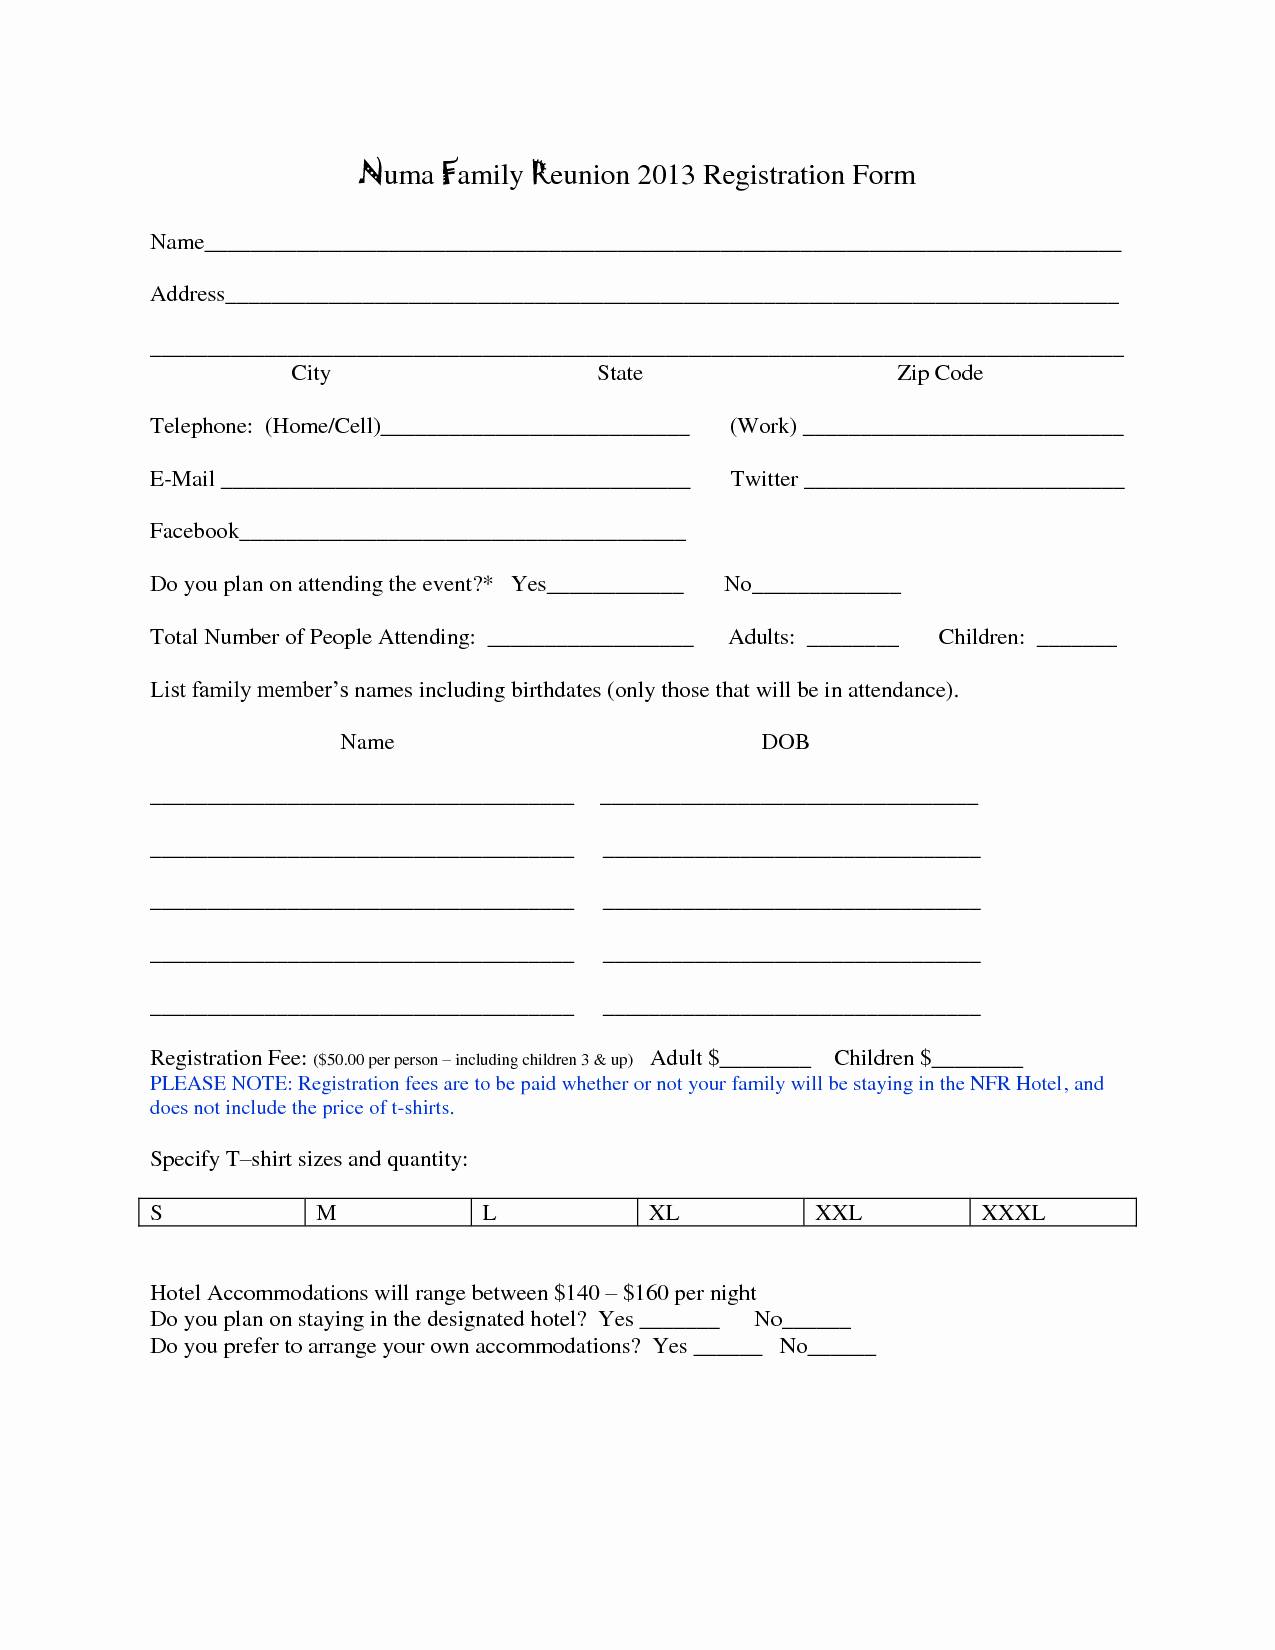 Conference Registration form Template Word New event Registration form Template Word Bamboodownunder